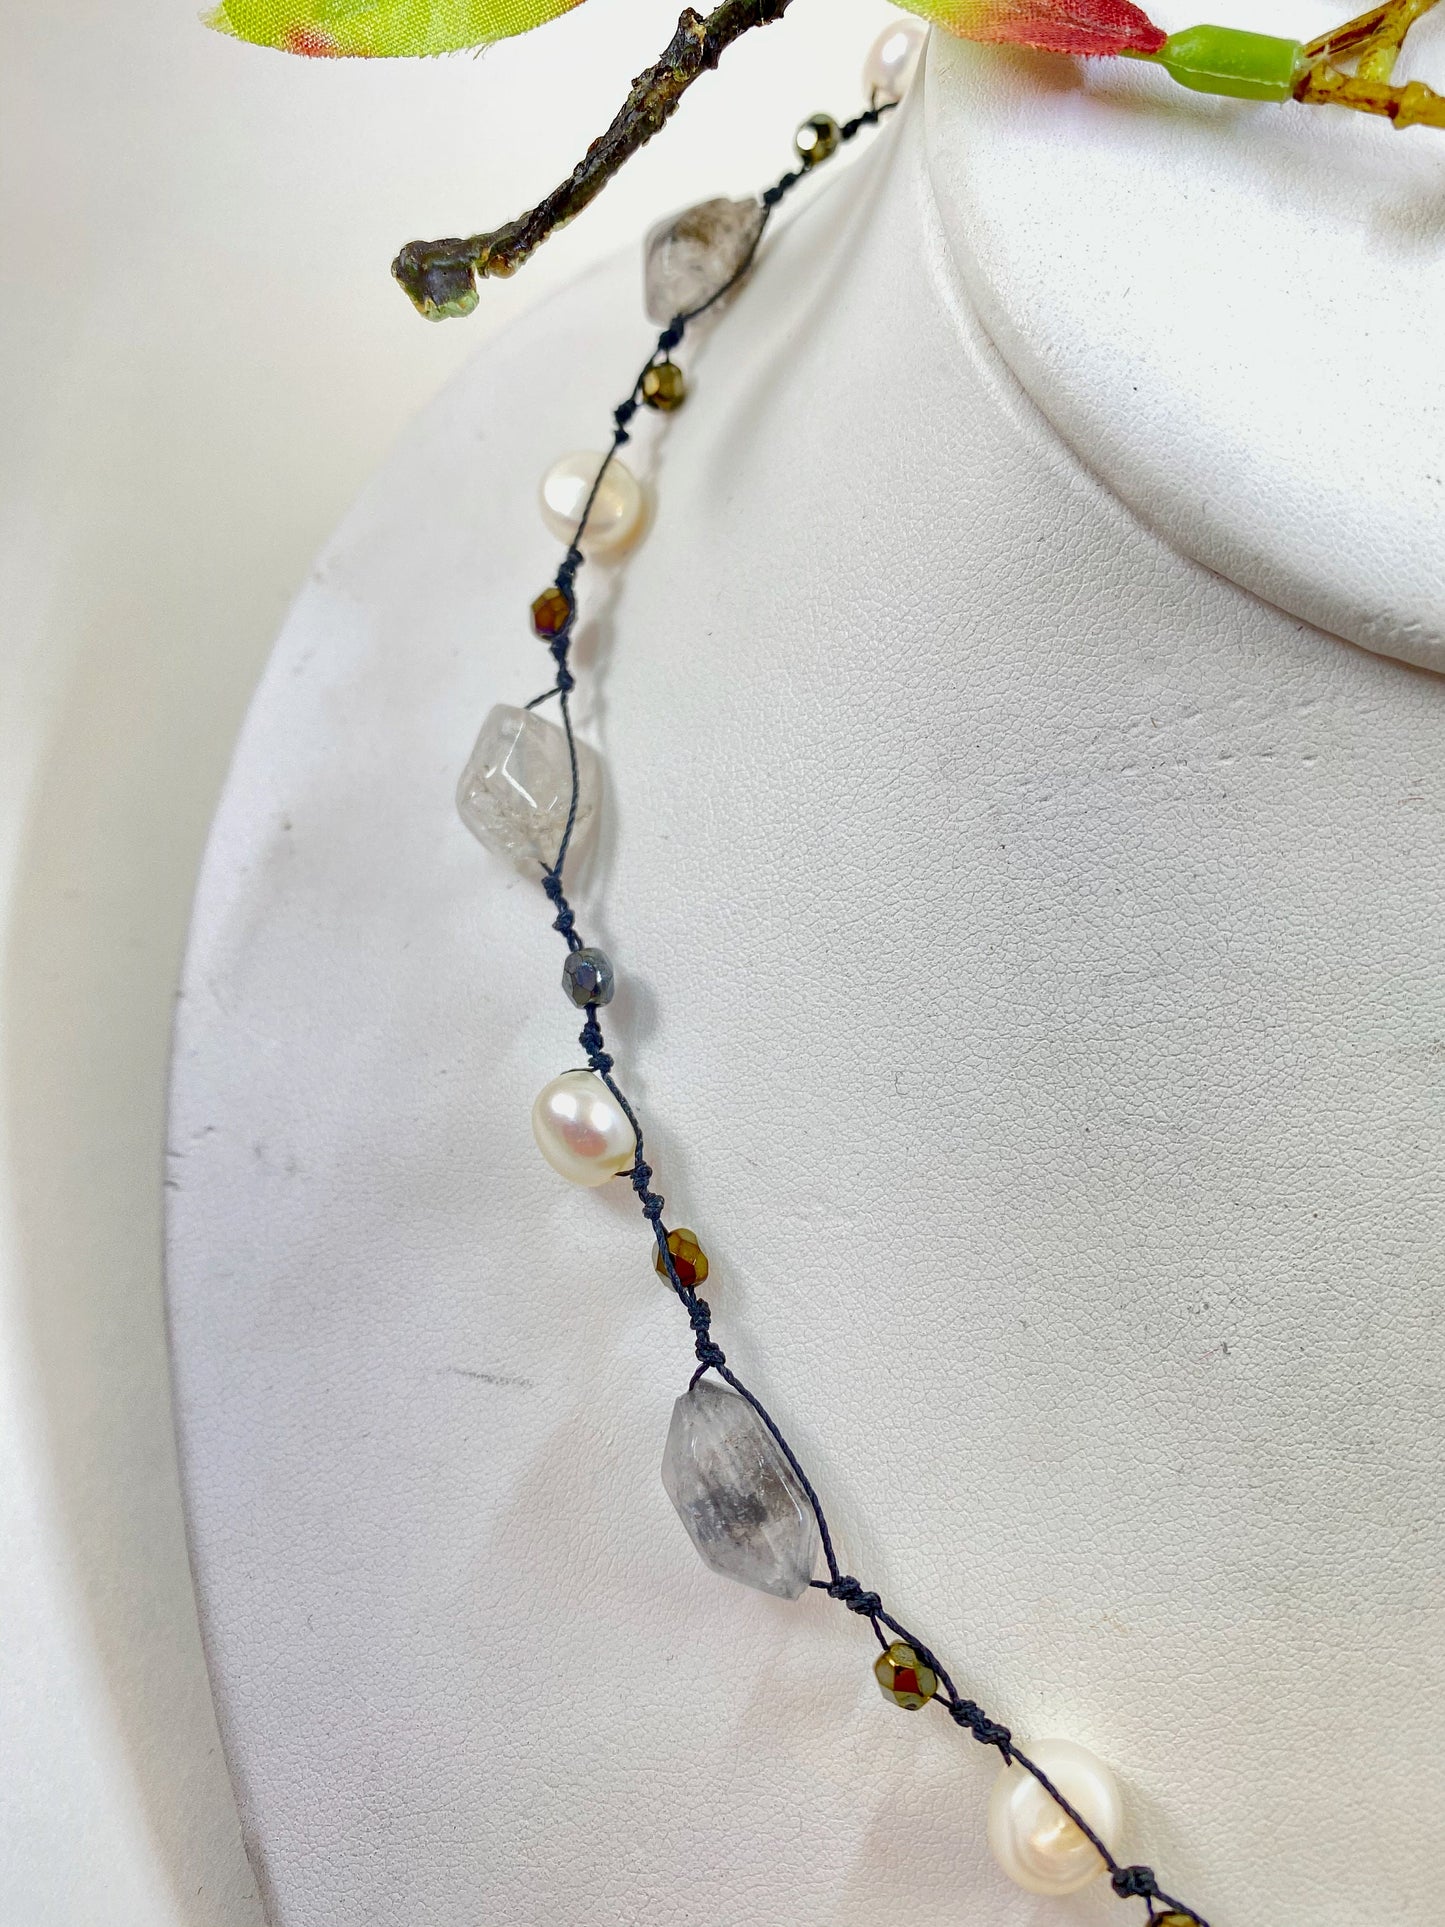 Pearls. Beautiful knotted quartz crystal and white fresh water pearl necklace. This necklace is hand knotted with black silk thread. Sterling clasp.